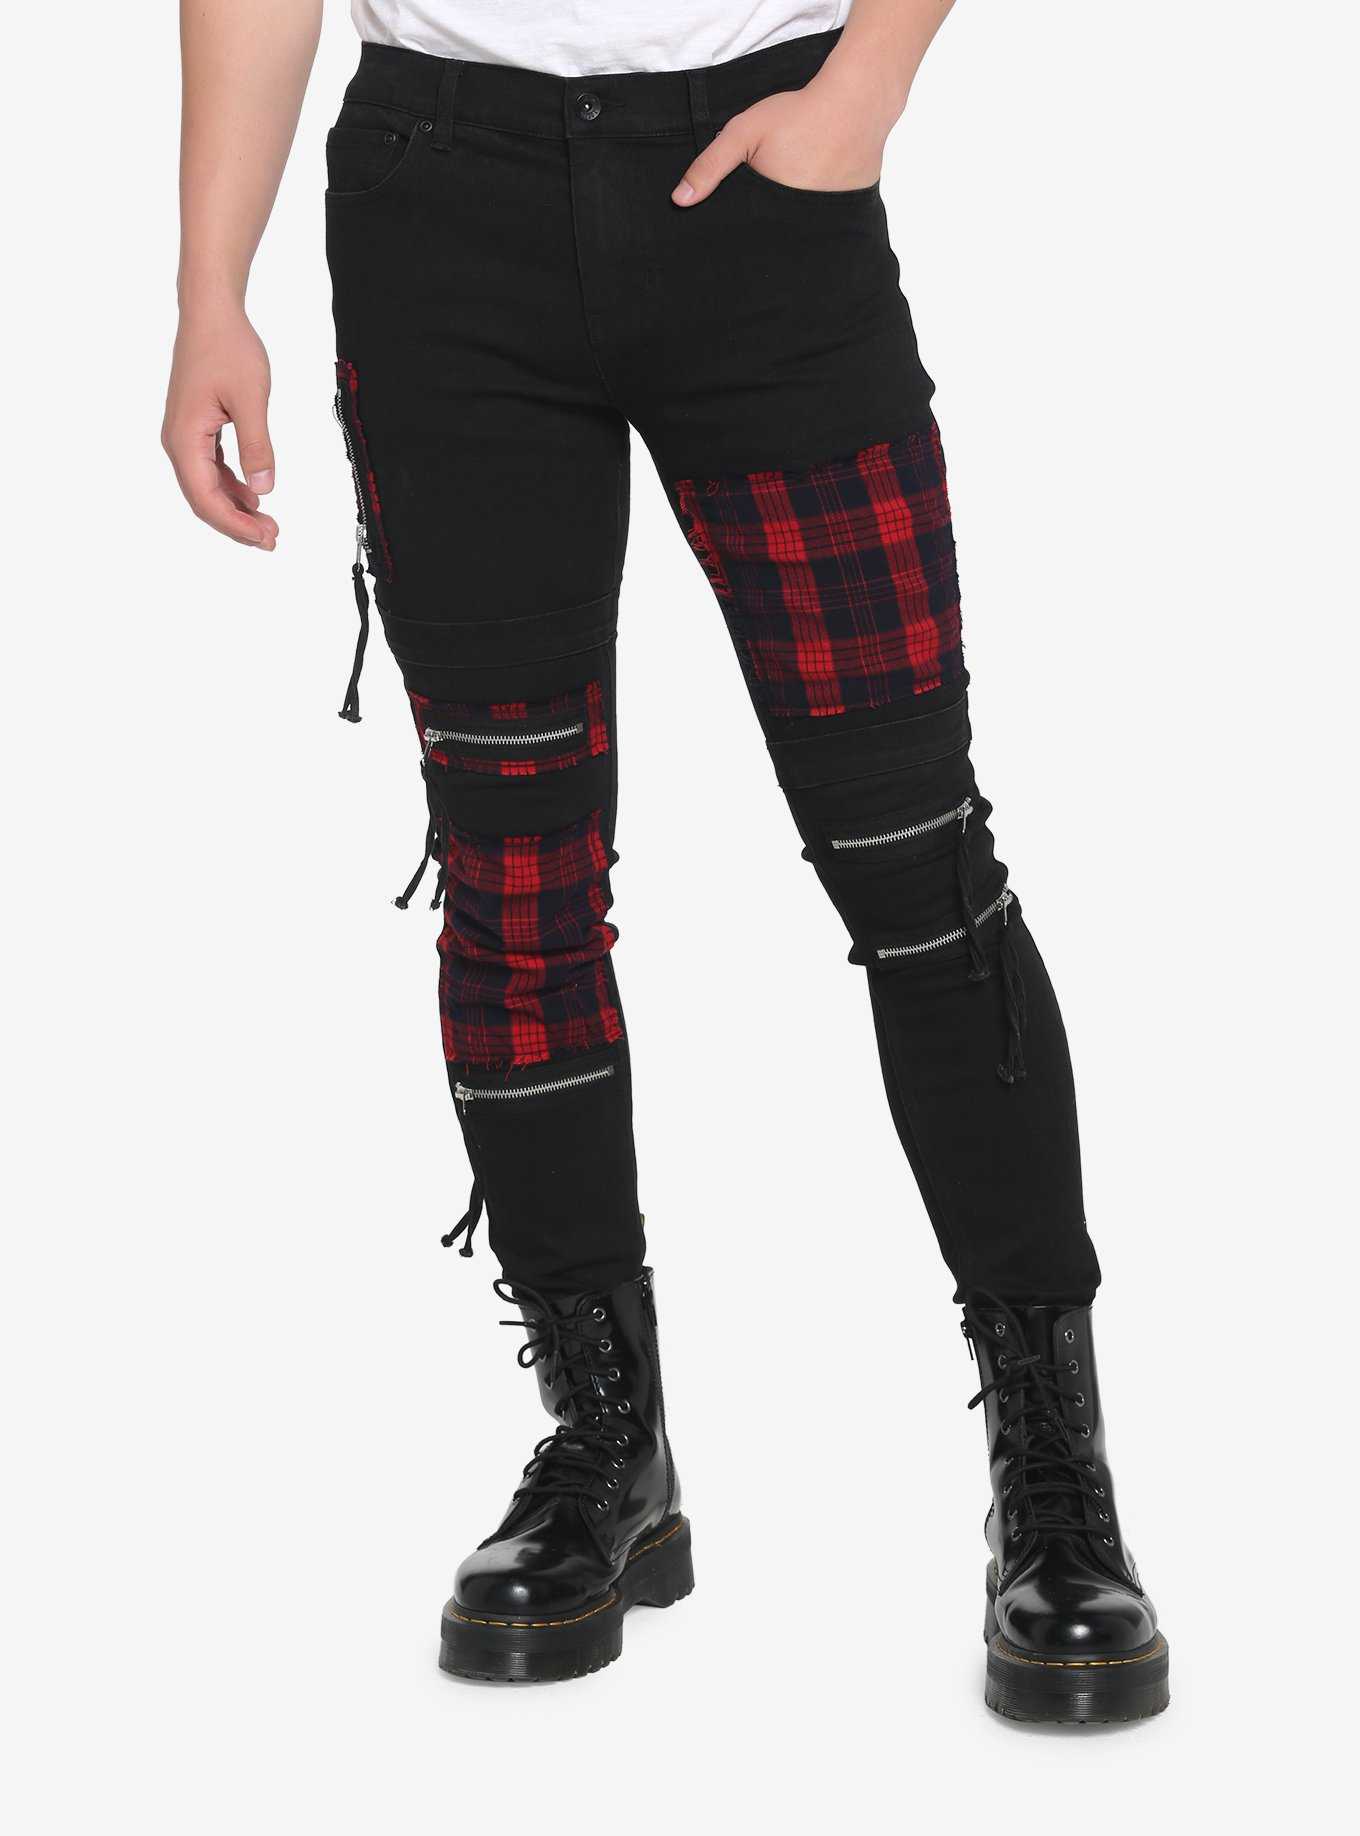 Hot Topic Plaid Pants With Chain Black Size XXL - $15 (55% Off Retail) -  From Justice